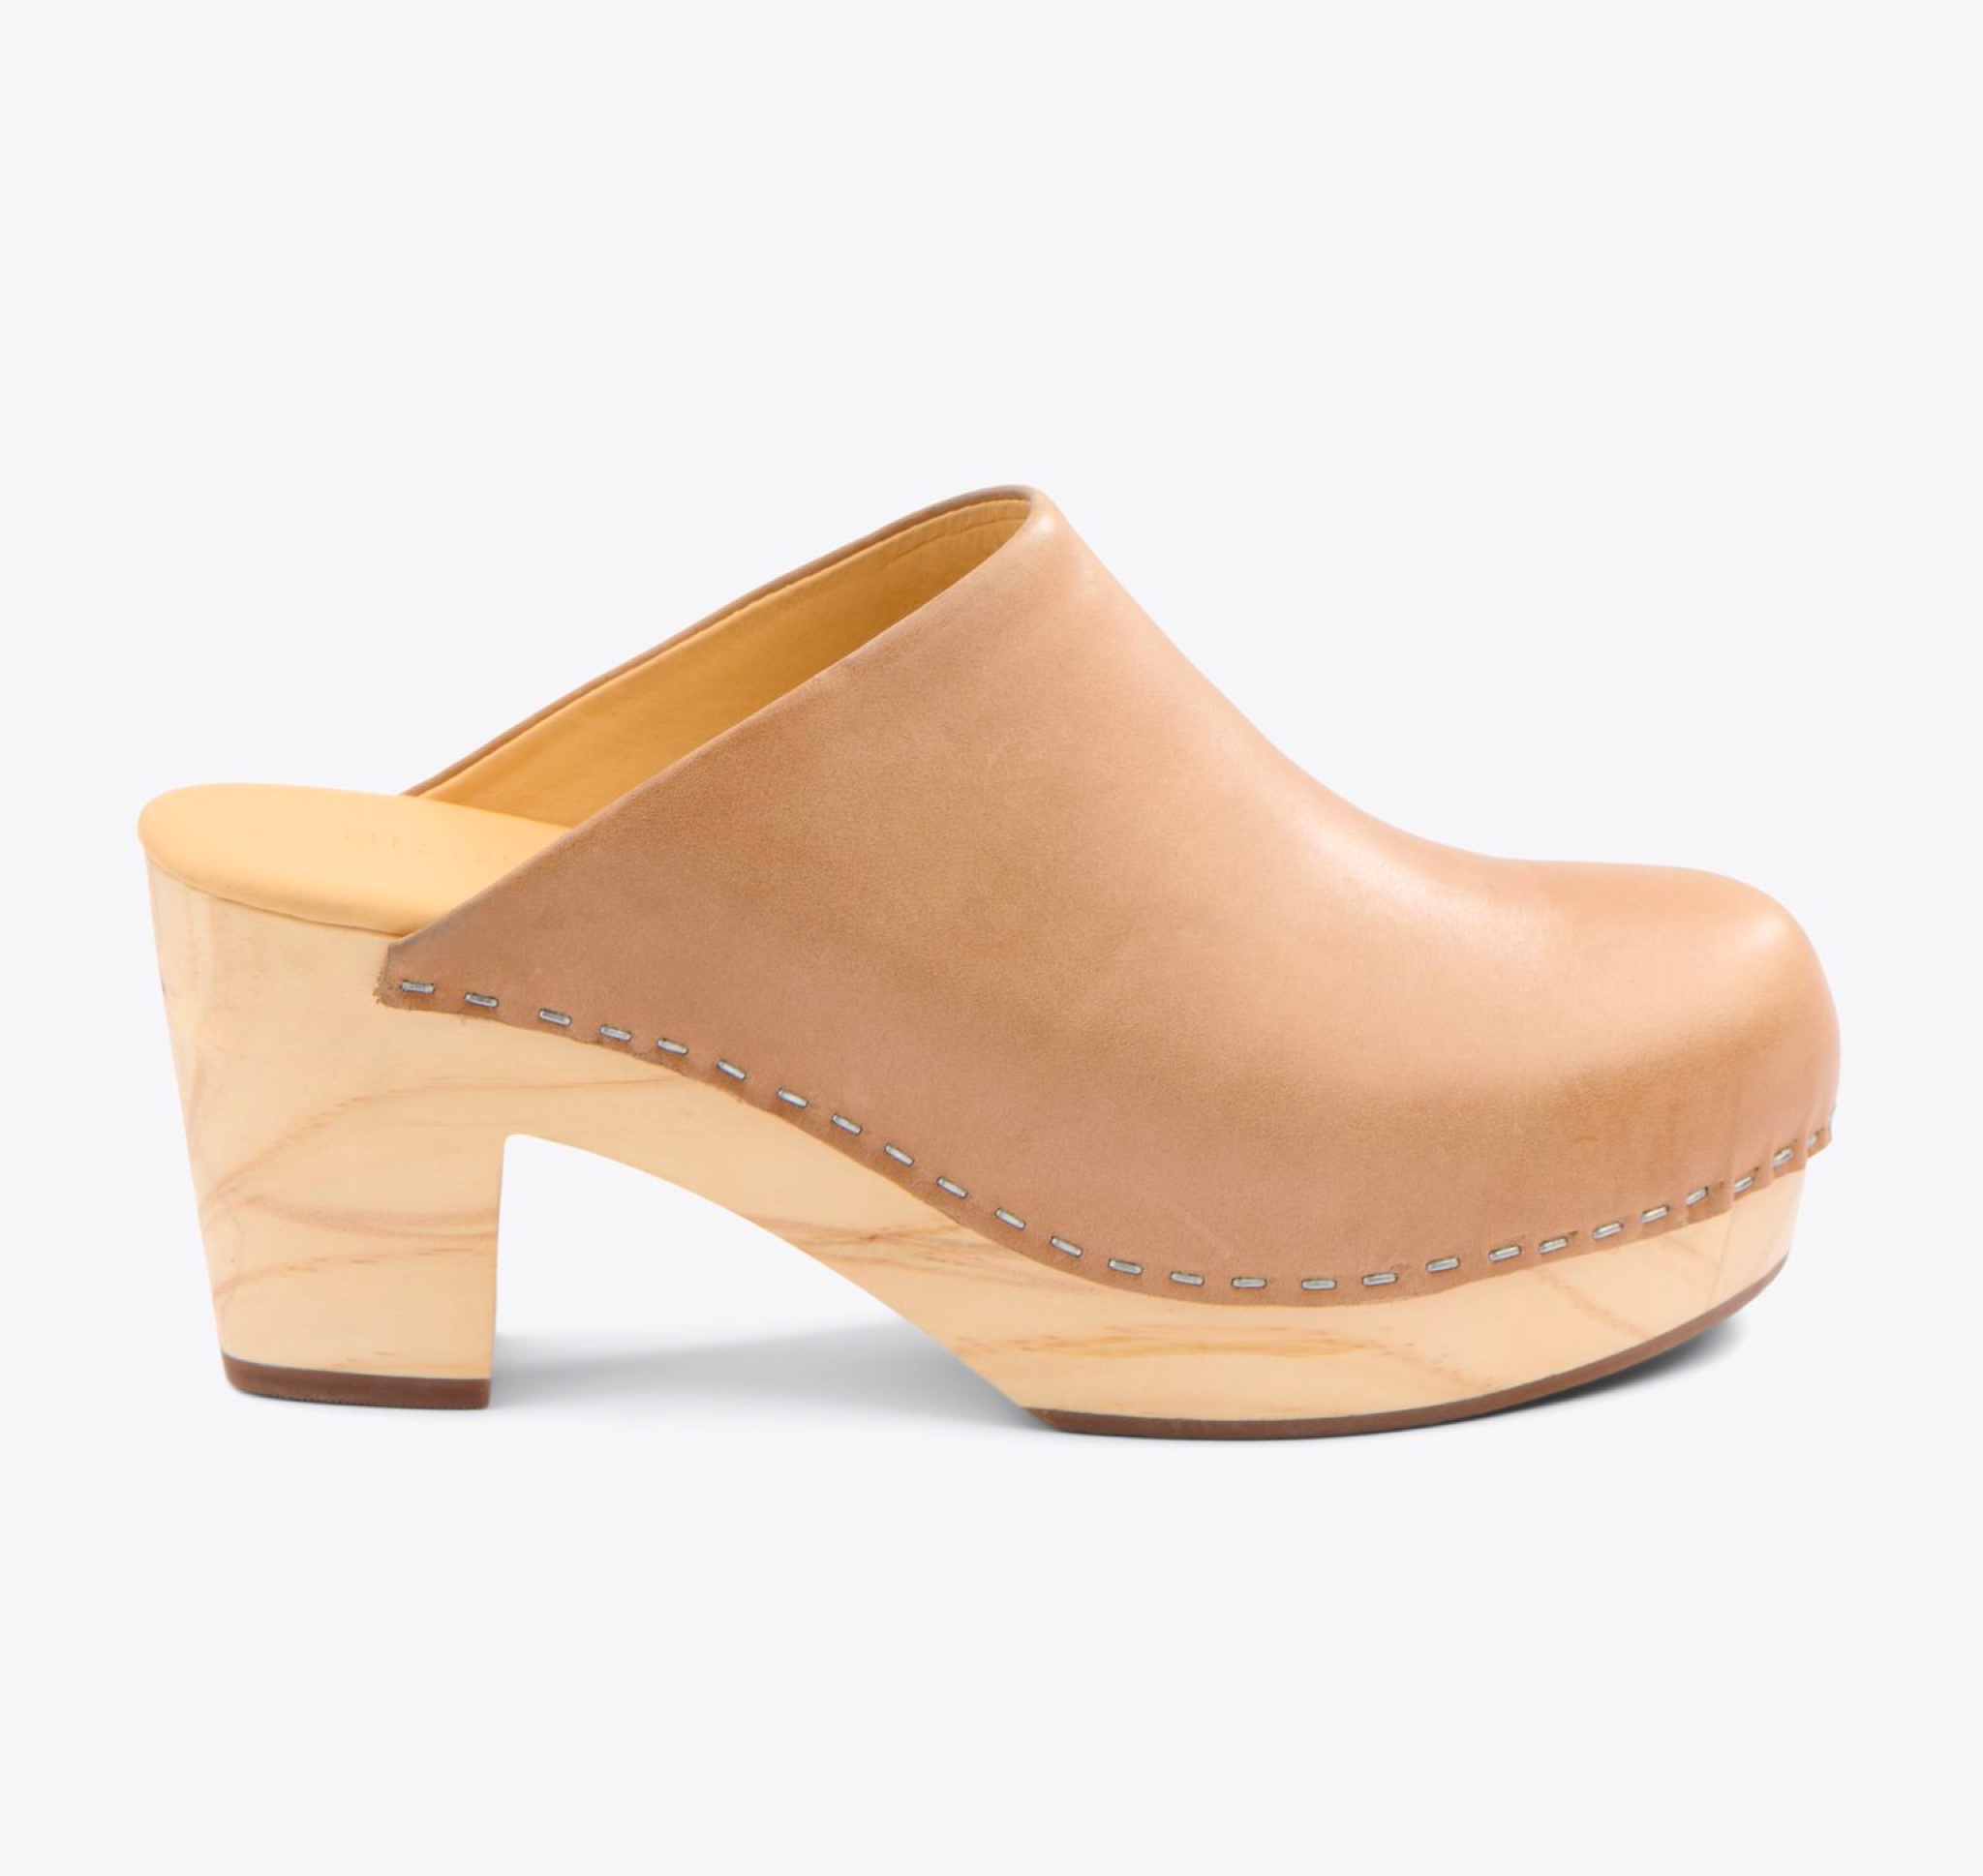 River Island Leather Heeled Clogs - Gold | very.co.uk